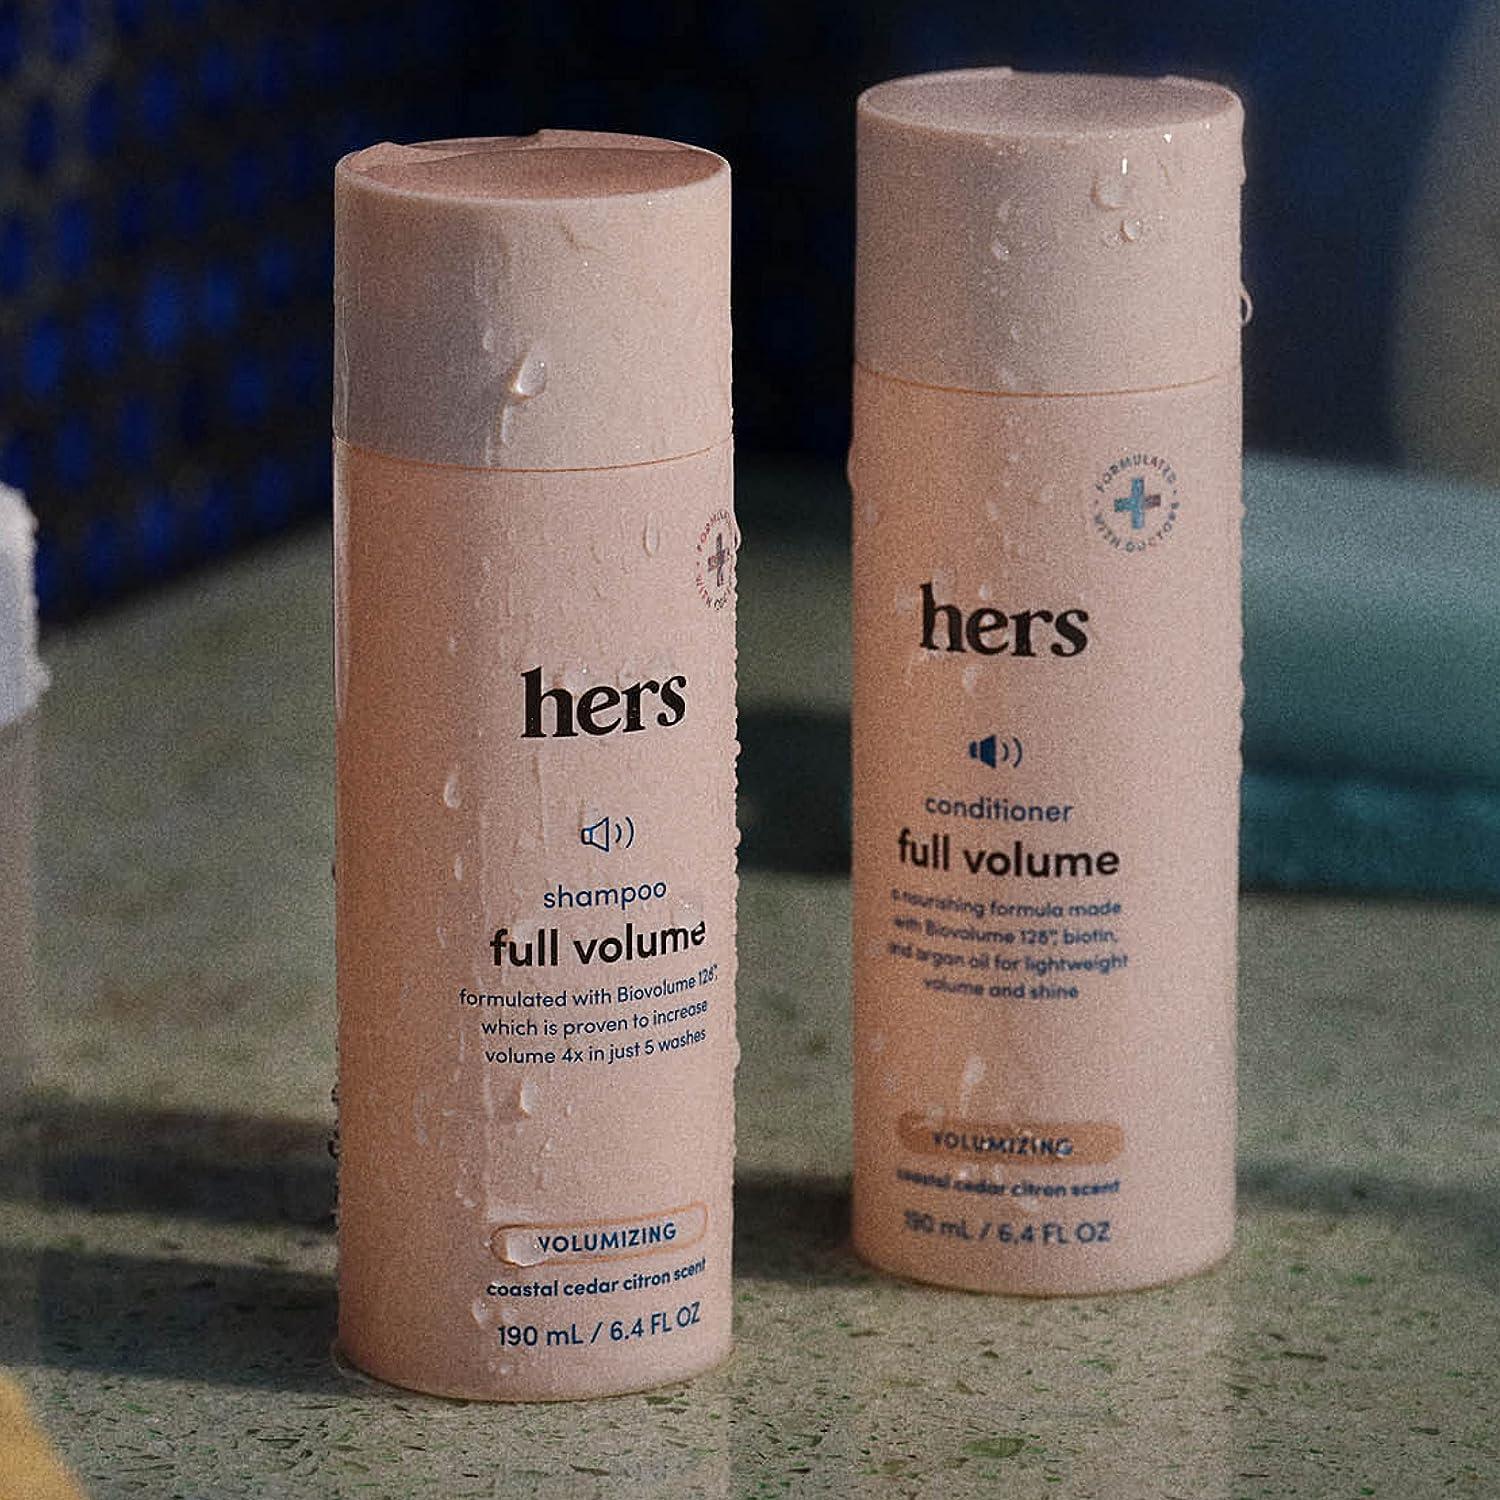 Hers Full Volume Shampoo and Conditioner - Volumizing Shampoo and Conditioner for Women - Soft Cedar & Citron - Adds Volume, Shine & Bounce - 2 x